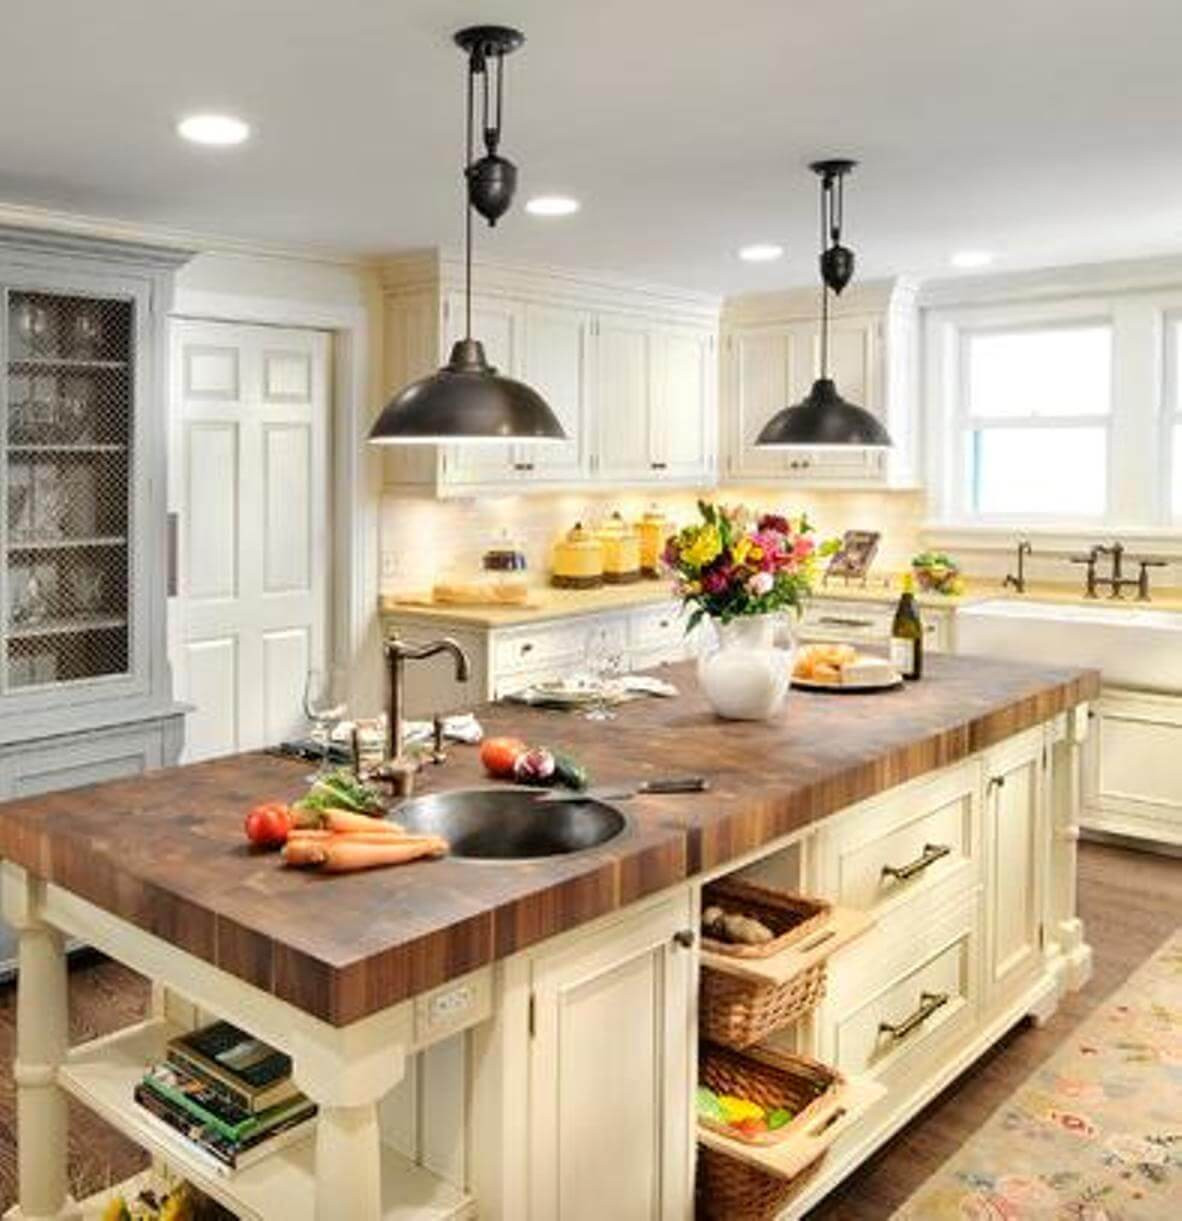 Country Kitchen Lights Fixtures
 Farm House Lighting Interior Design and Ideas TheyDesign